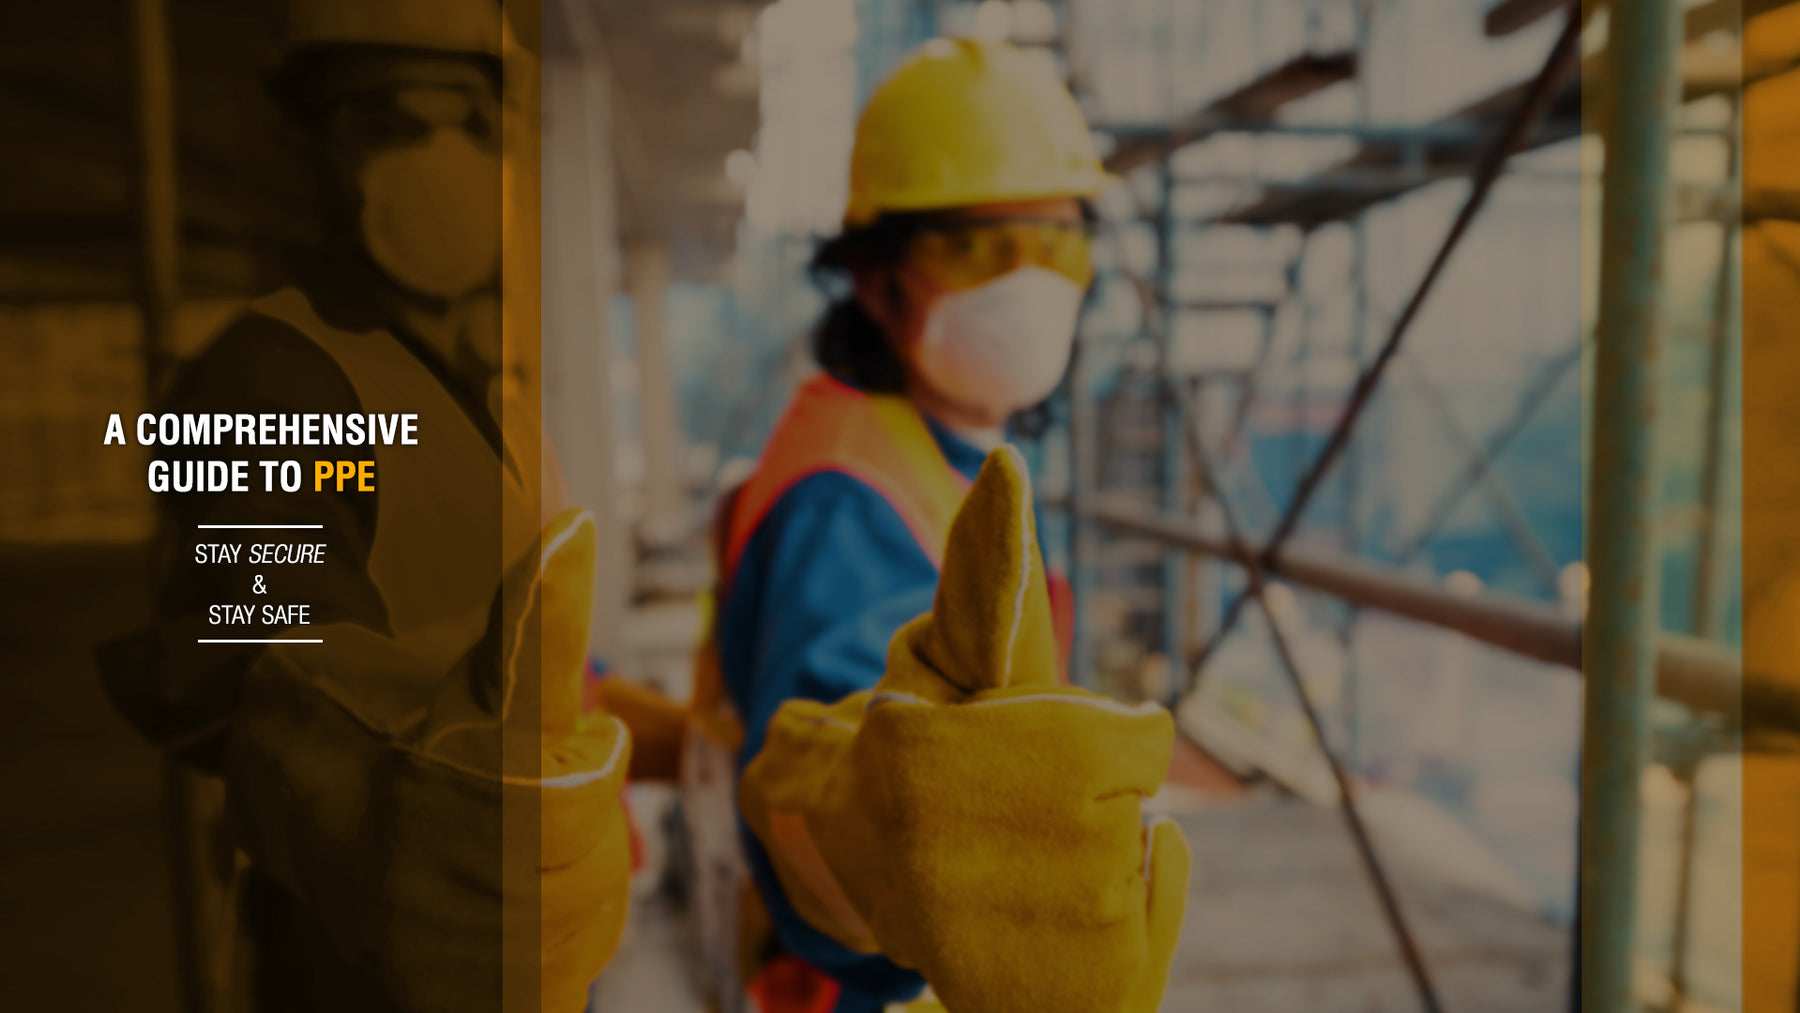 Maximizing Safety with Personal Protective Equipment (PPE)